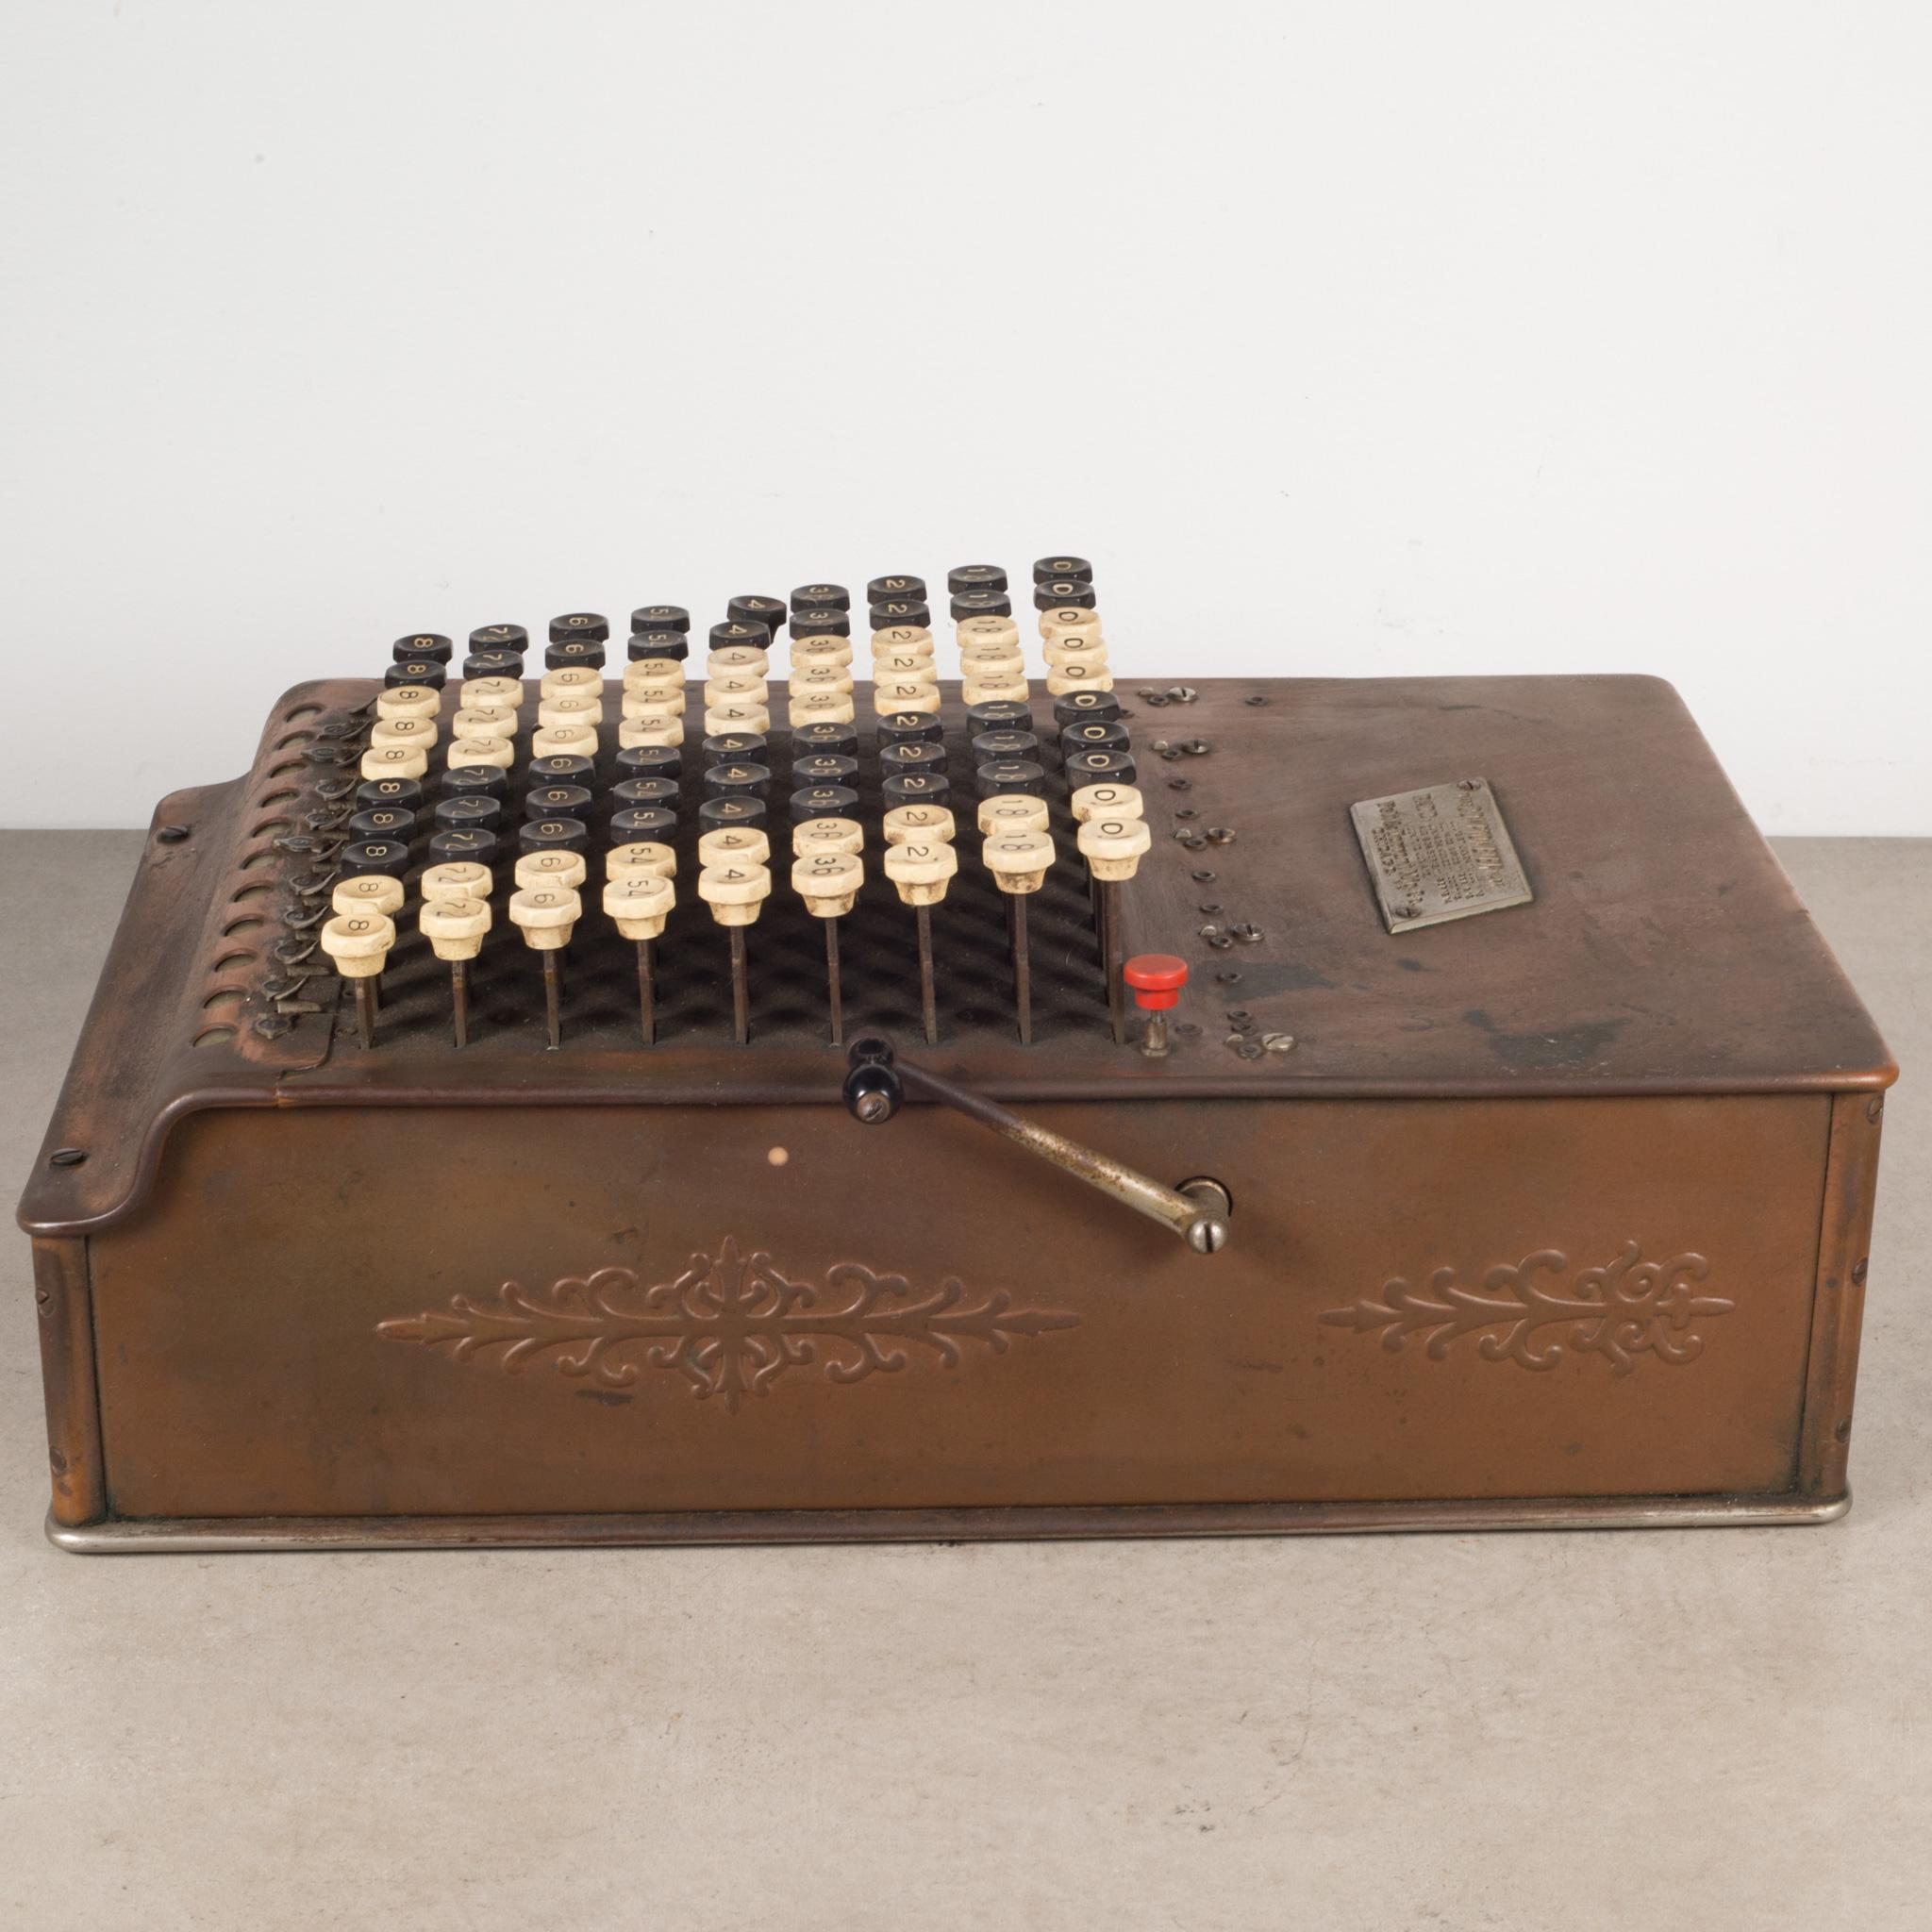 Industrial Late 19th/Early 20th C. Copper Adding Machine c.1887-1914